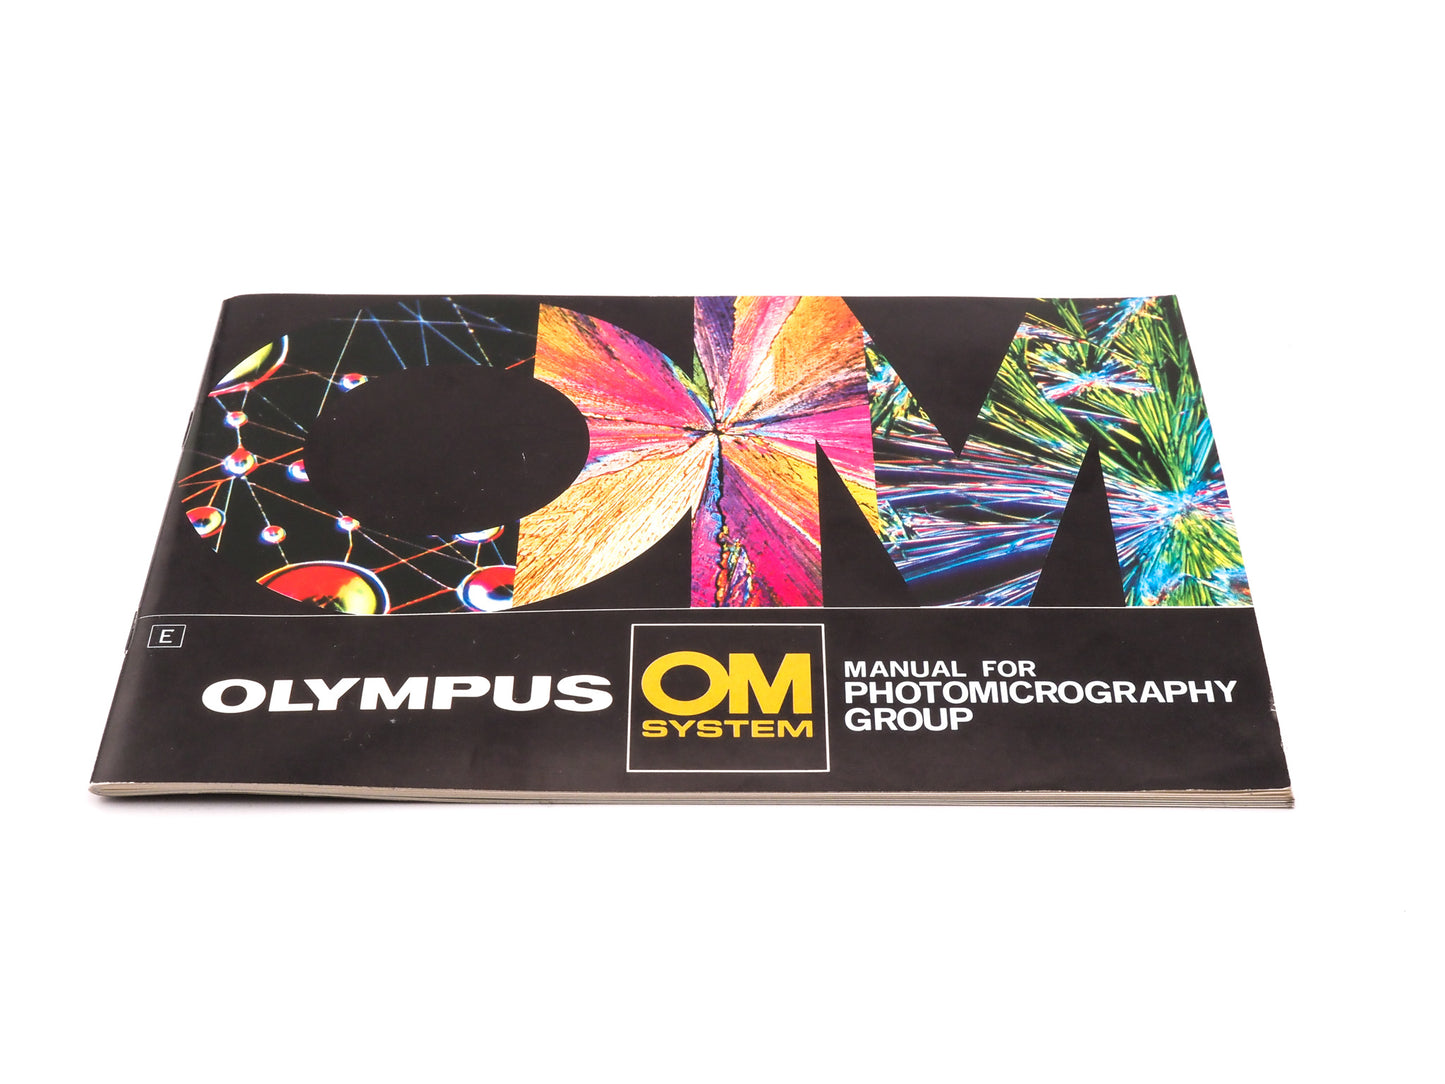 Olympus Manual for Photomicrography Group